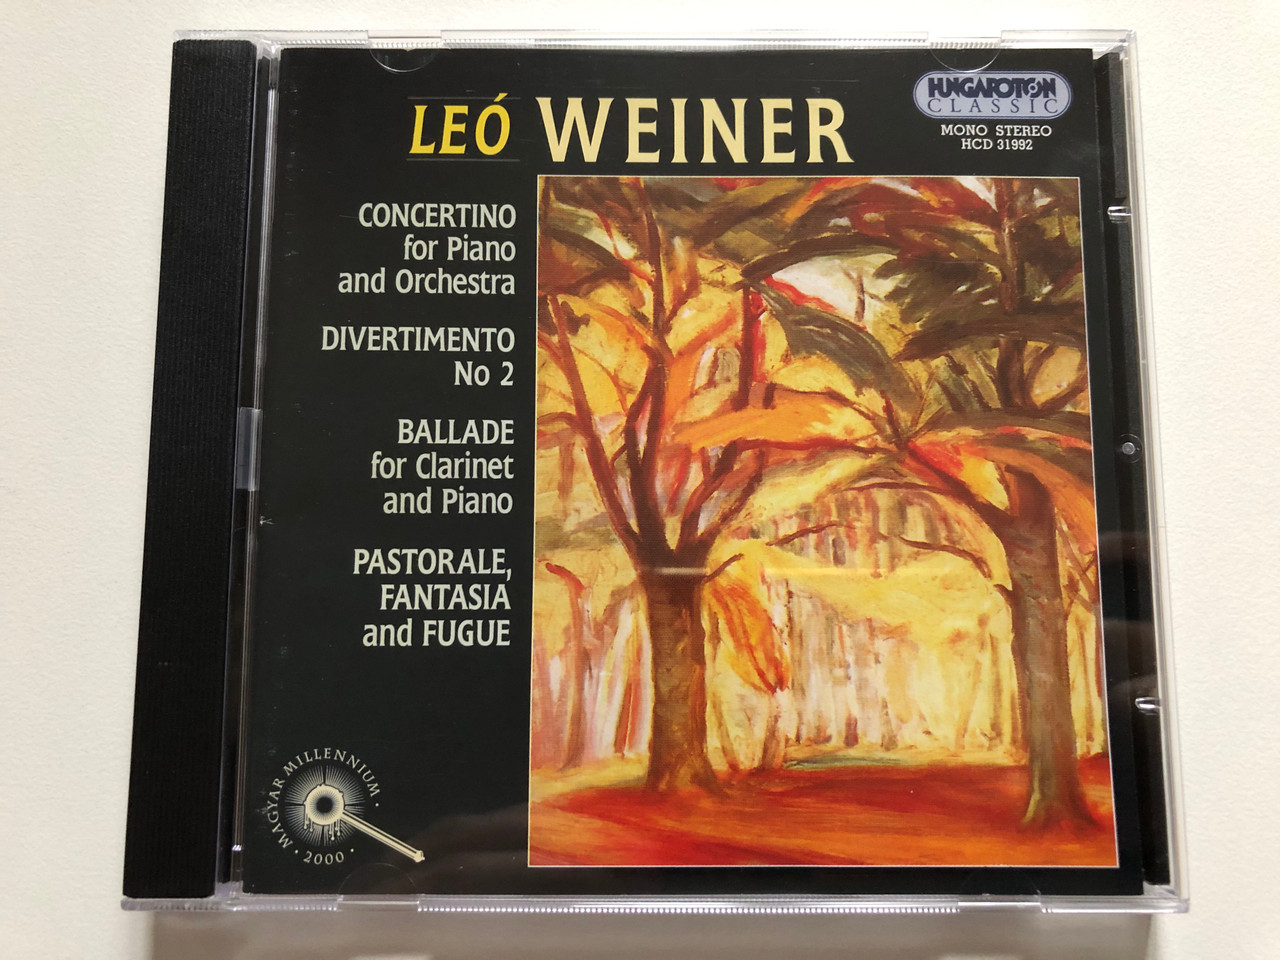 https://cdn10.bigcommerce.com/s-62bdpkt7pb/products/0/images/306309/Le_Weiner_Concertino_For_Piano_And_Orchestra_Divertimento_No.2_Ballade_for_Clarinet_and_Piano_Pastorale_Fantasia_and_Fugue_Hungaroton_Classic_Audio_CD_2001_Mono_Stereo_HCD_31992_1__10966.1698222041.1280.1280.JPG?c=2